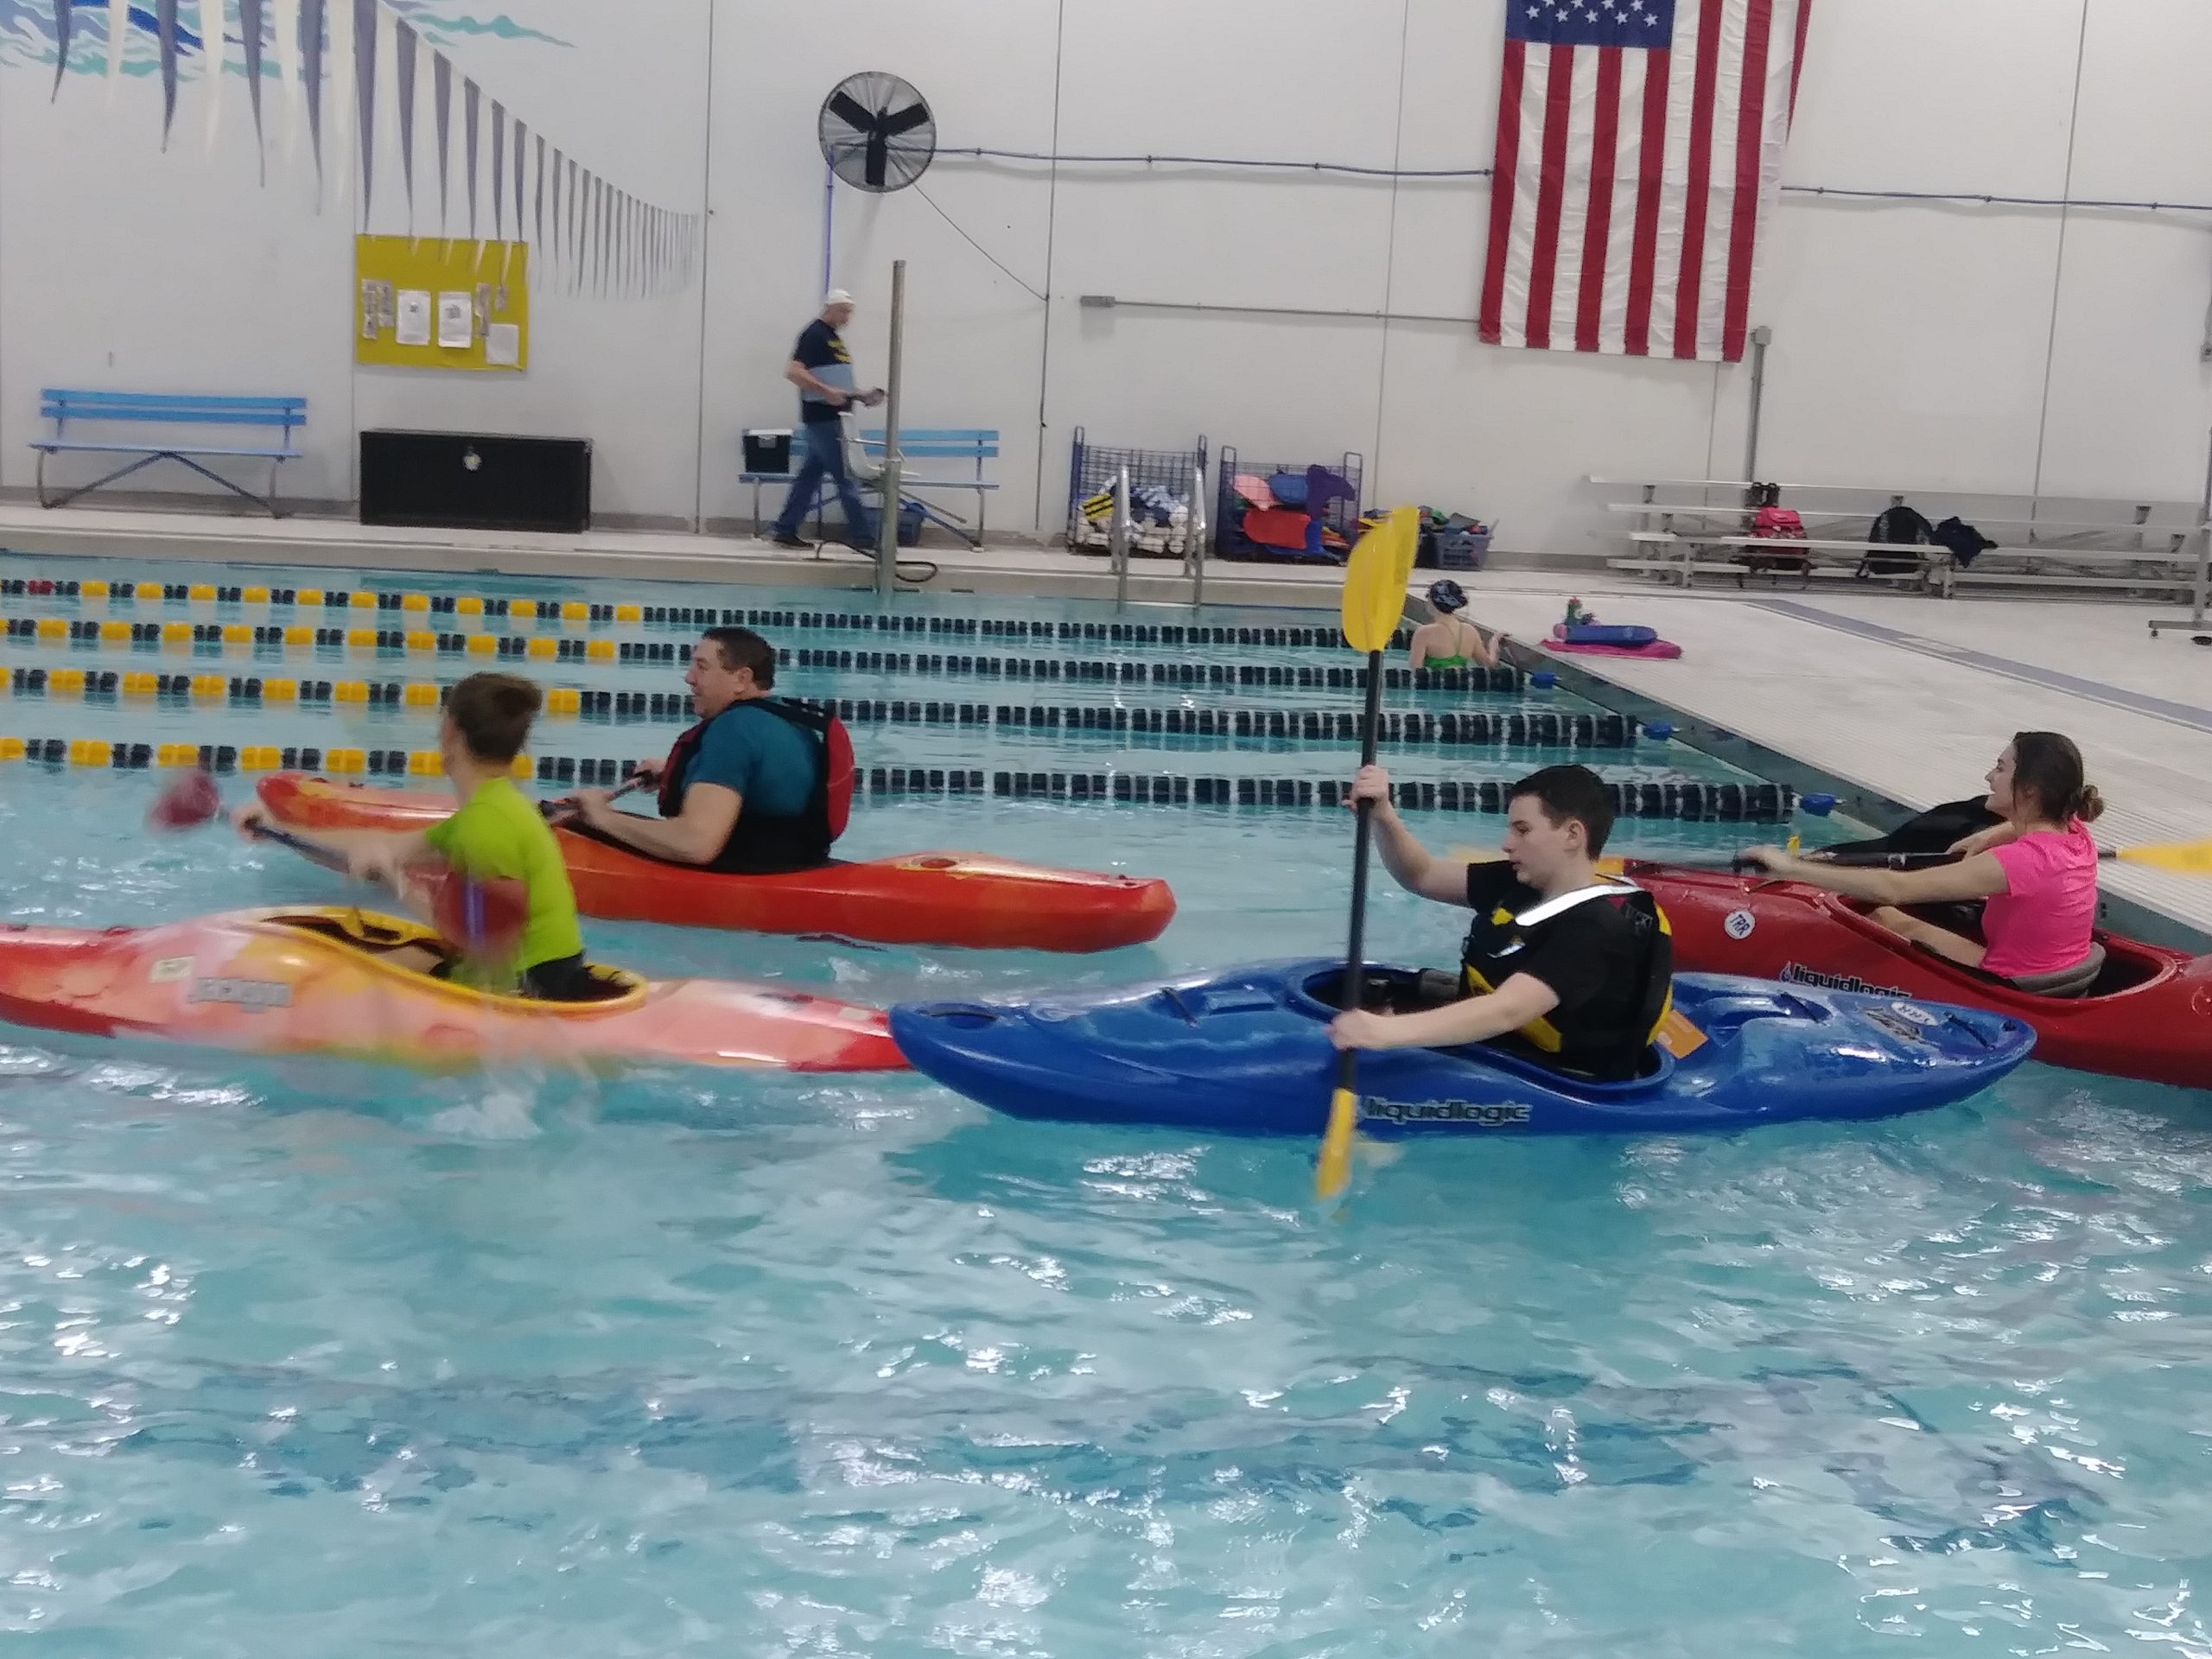 Four people in a swimming pool in kayaks